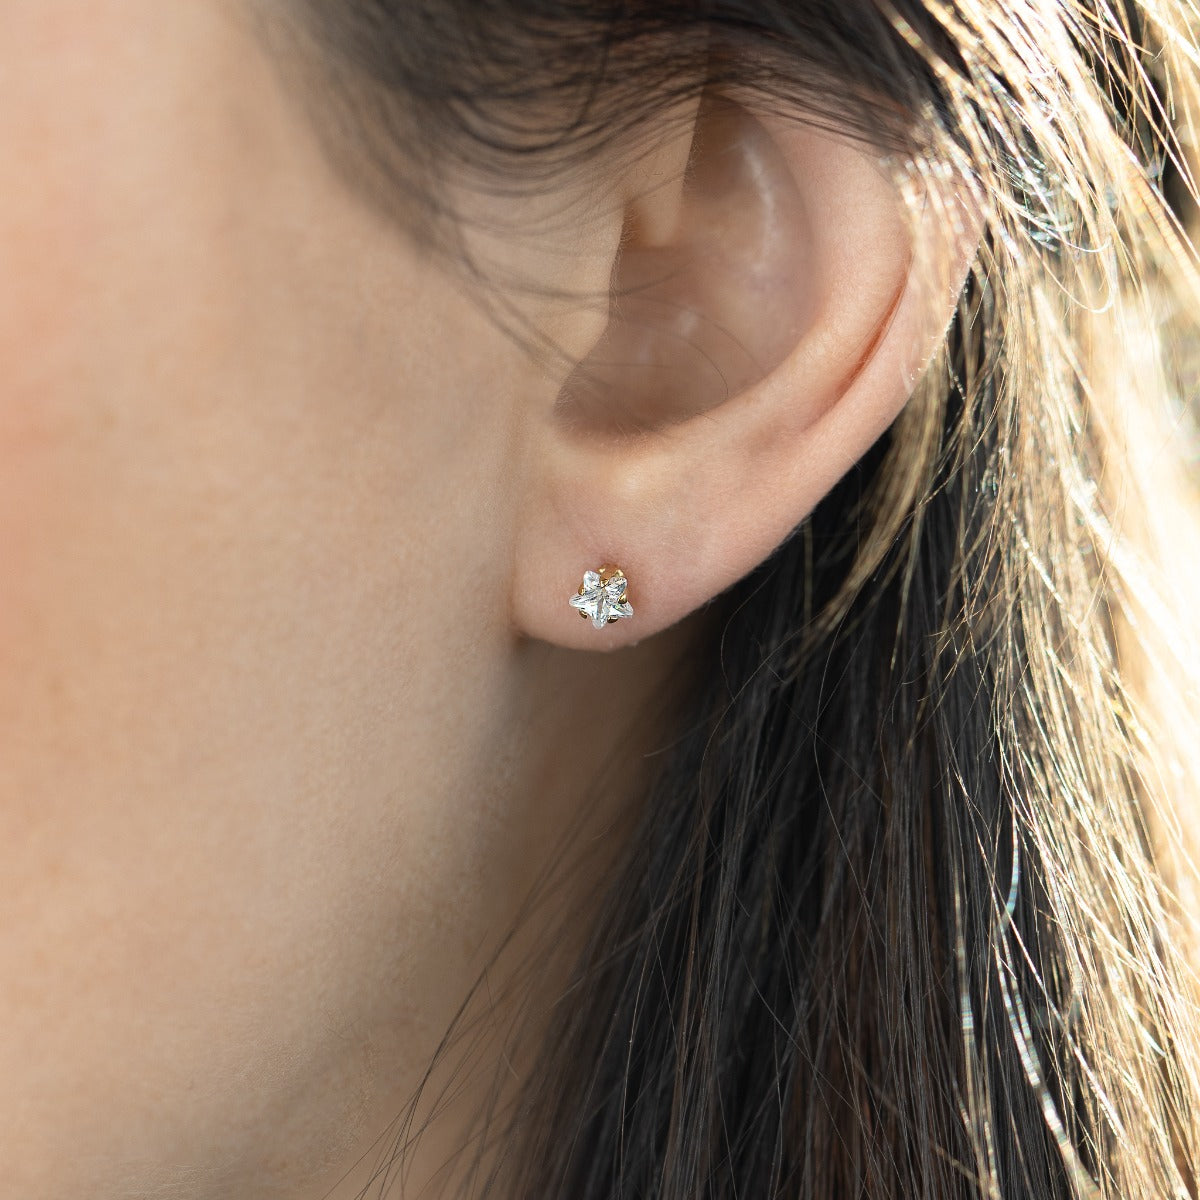 Mini 3mm golden earrings with a white zirconia stone with a star shaped